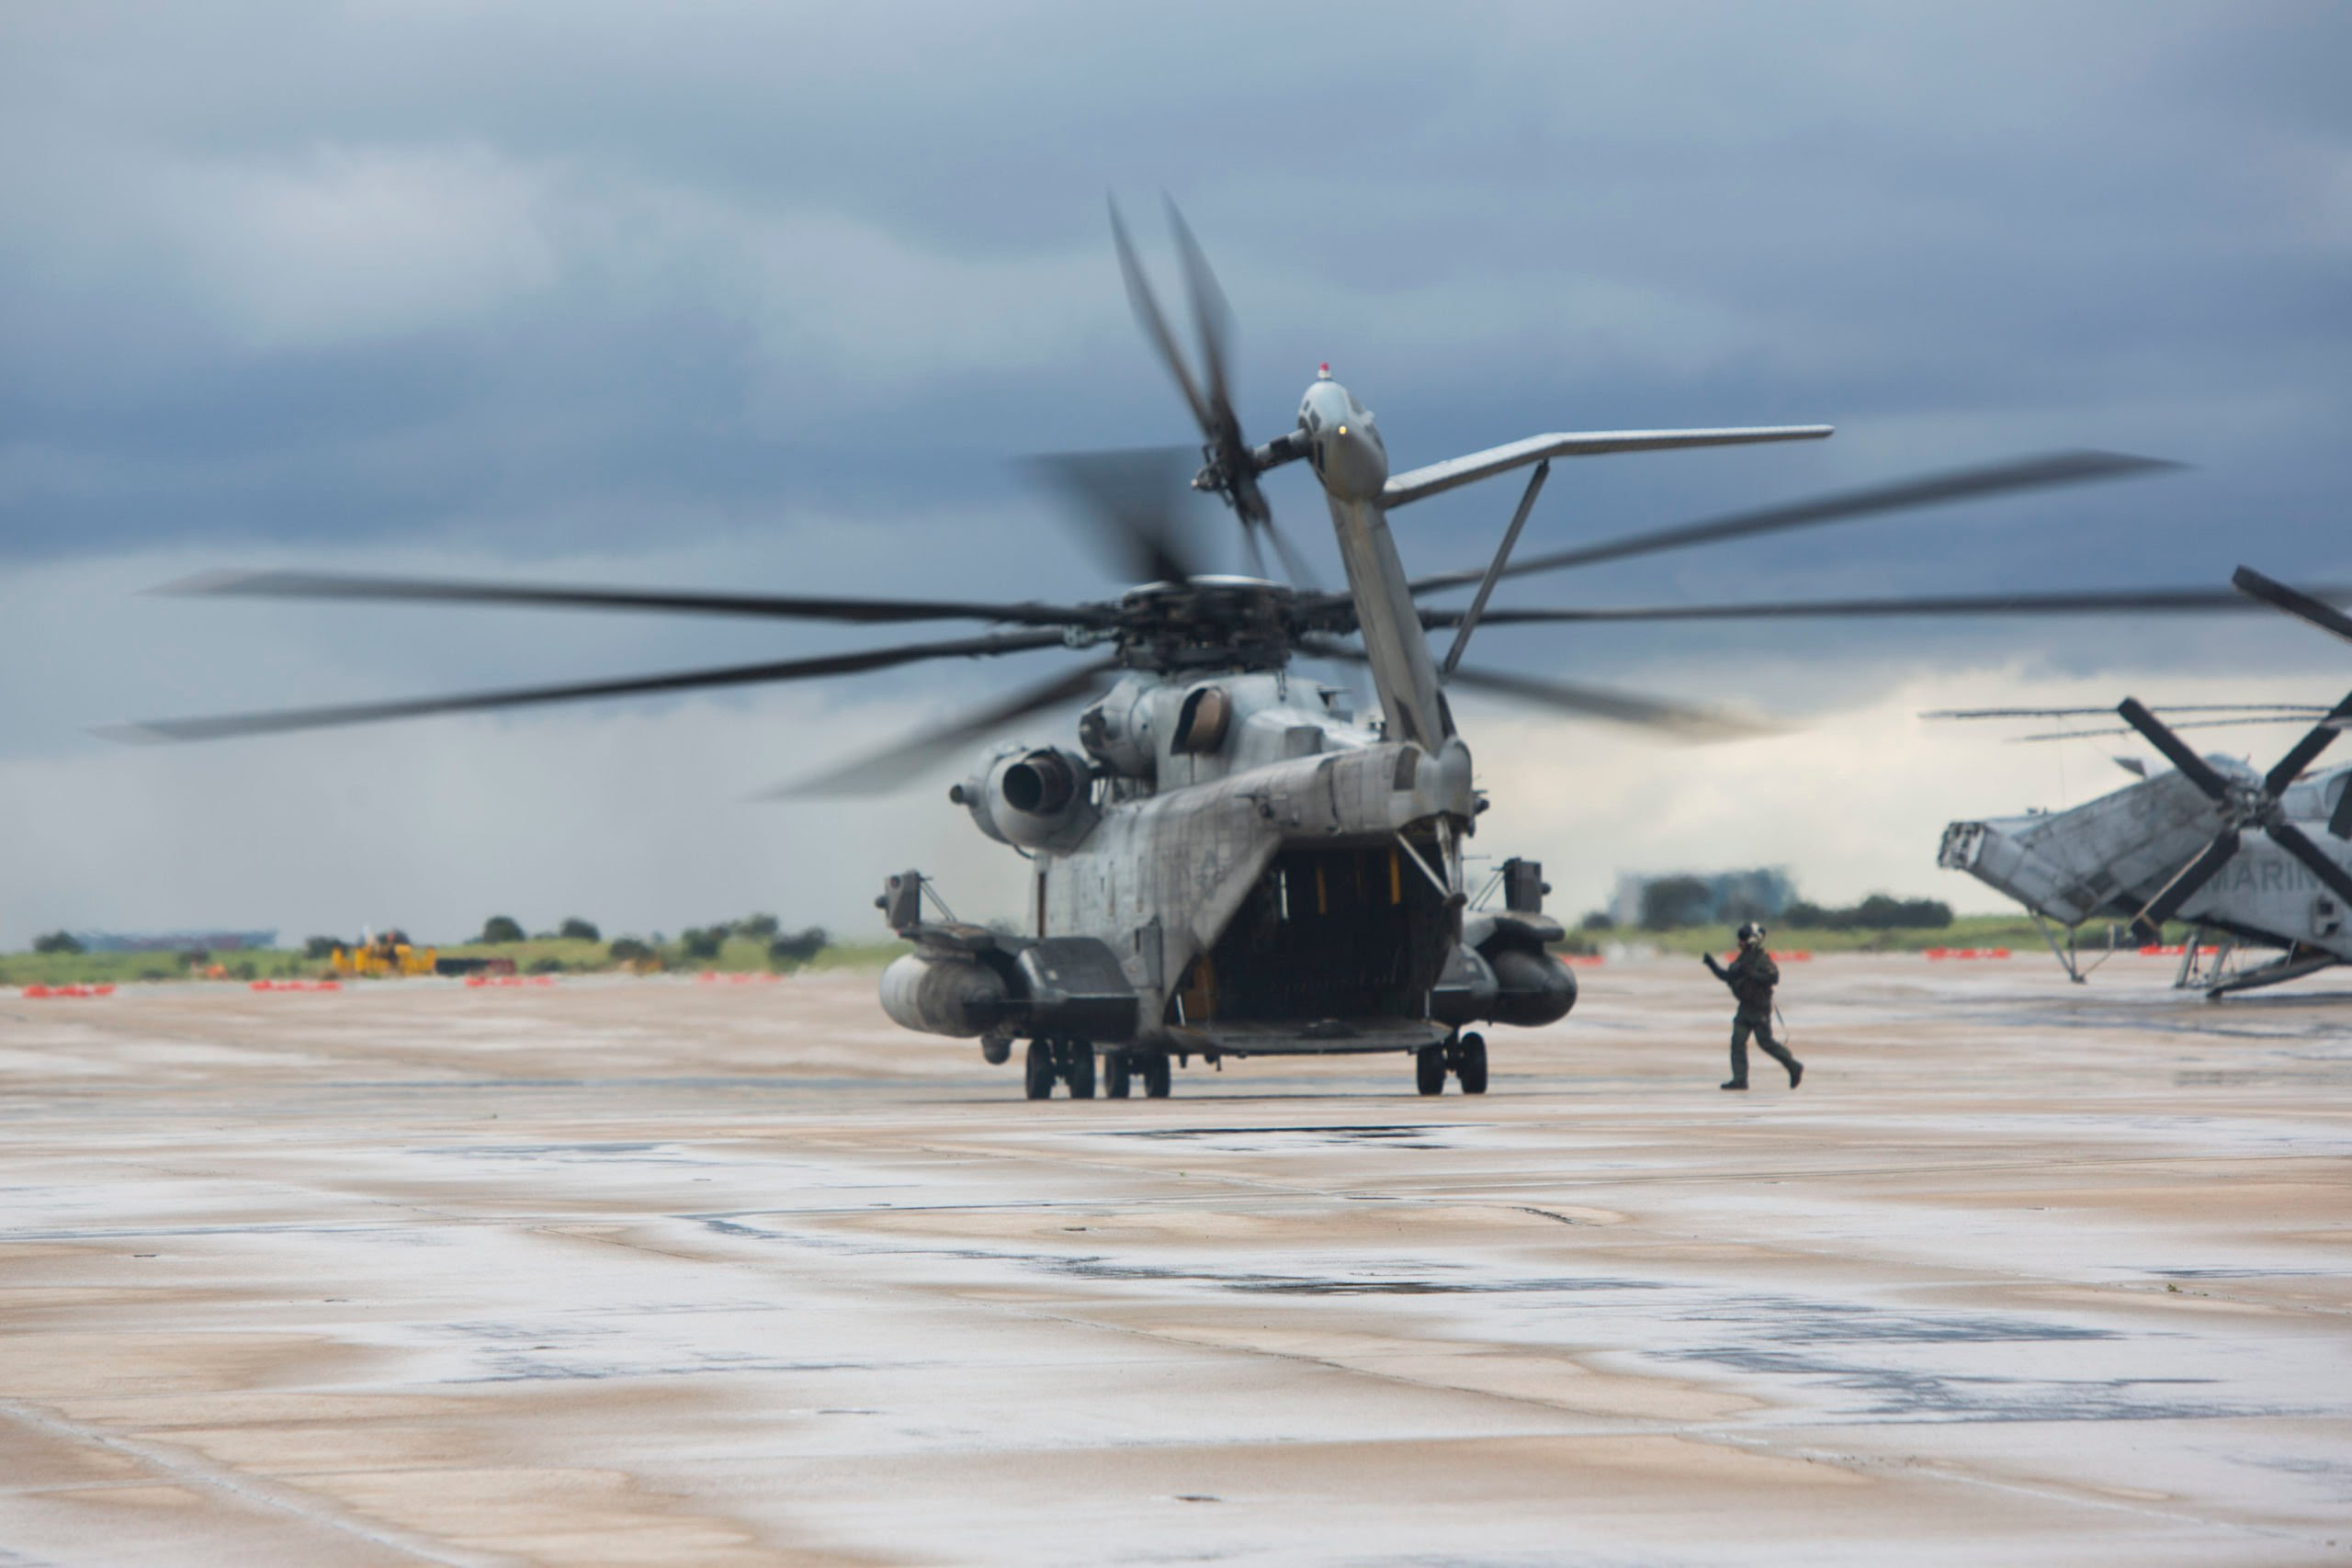 U.S. Marines with Marine Heavy Helicopter Squadron 462, Marine Aircraft Group 16, 3rd Marine Aircraft Wing, enforce precautionary measures during the maintenance of CH-53E Super Stallions on Marine Corps Air Station Miramar, Calif., March 17, 2020. The purpose of these measures is to mitigate the spread of COVID-19 while continuing to perform mission essential tasks.